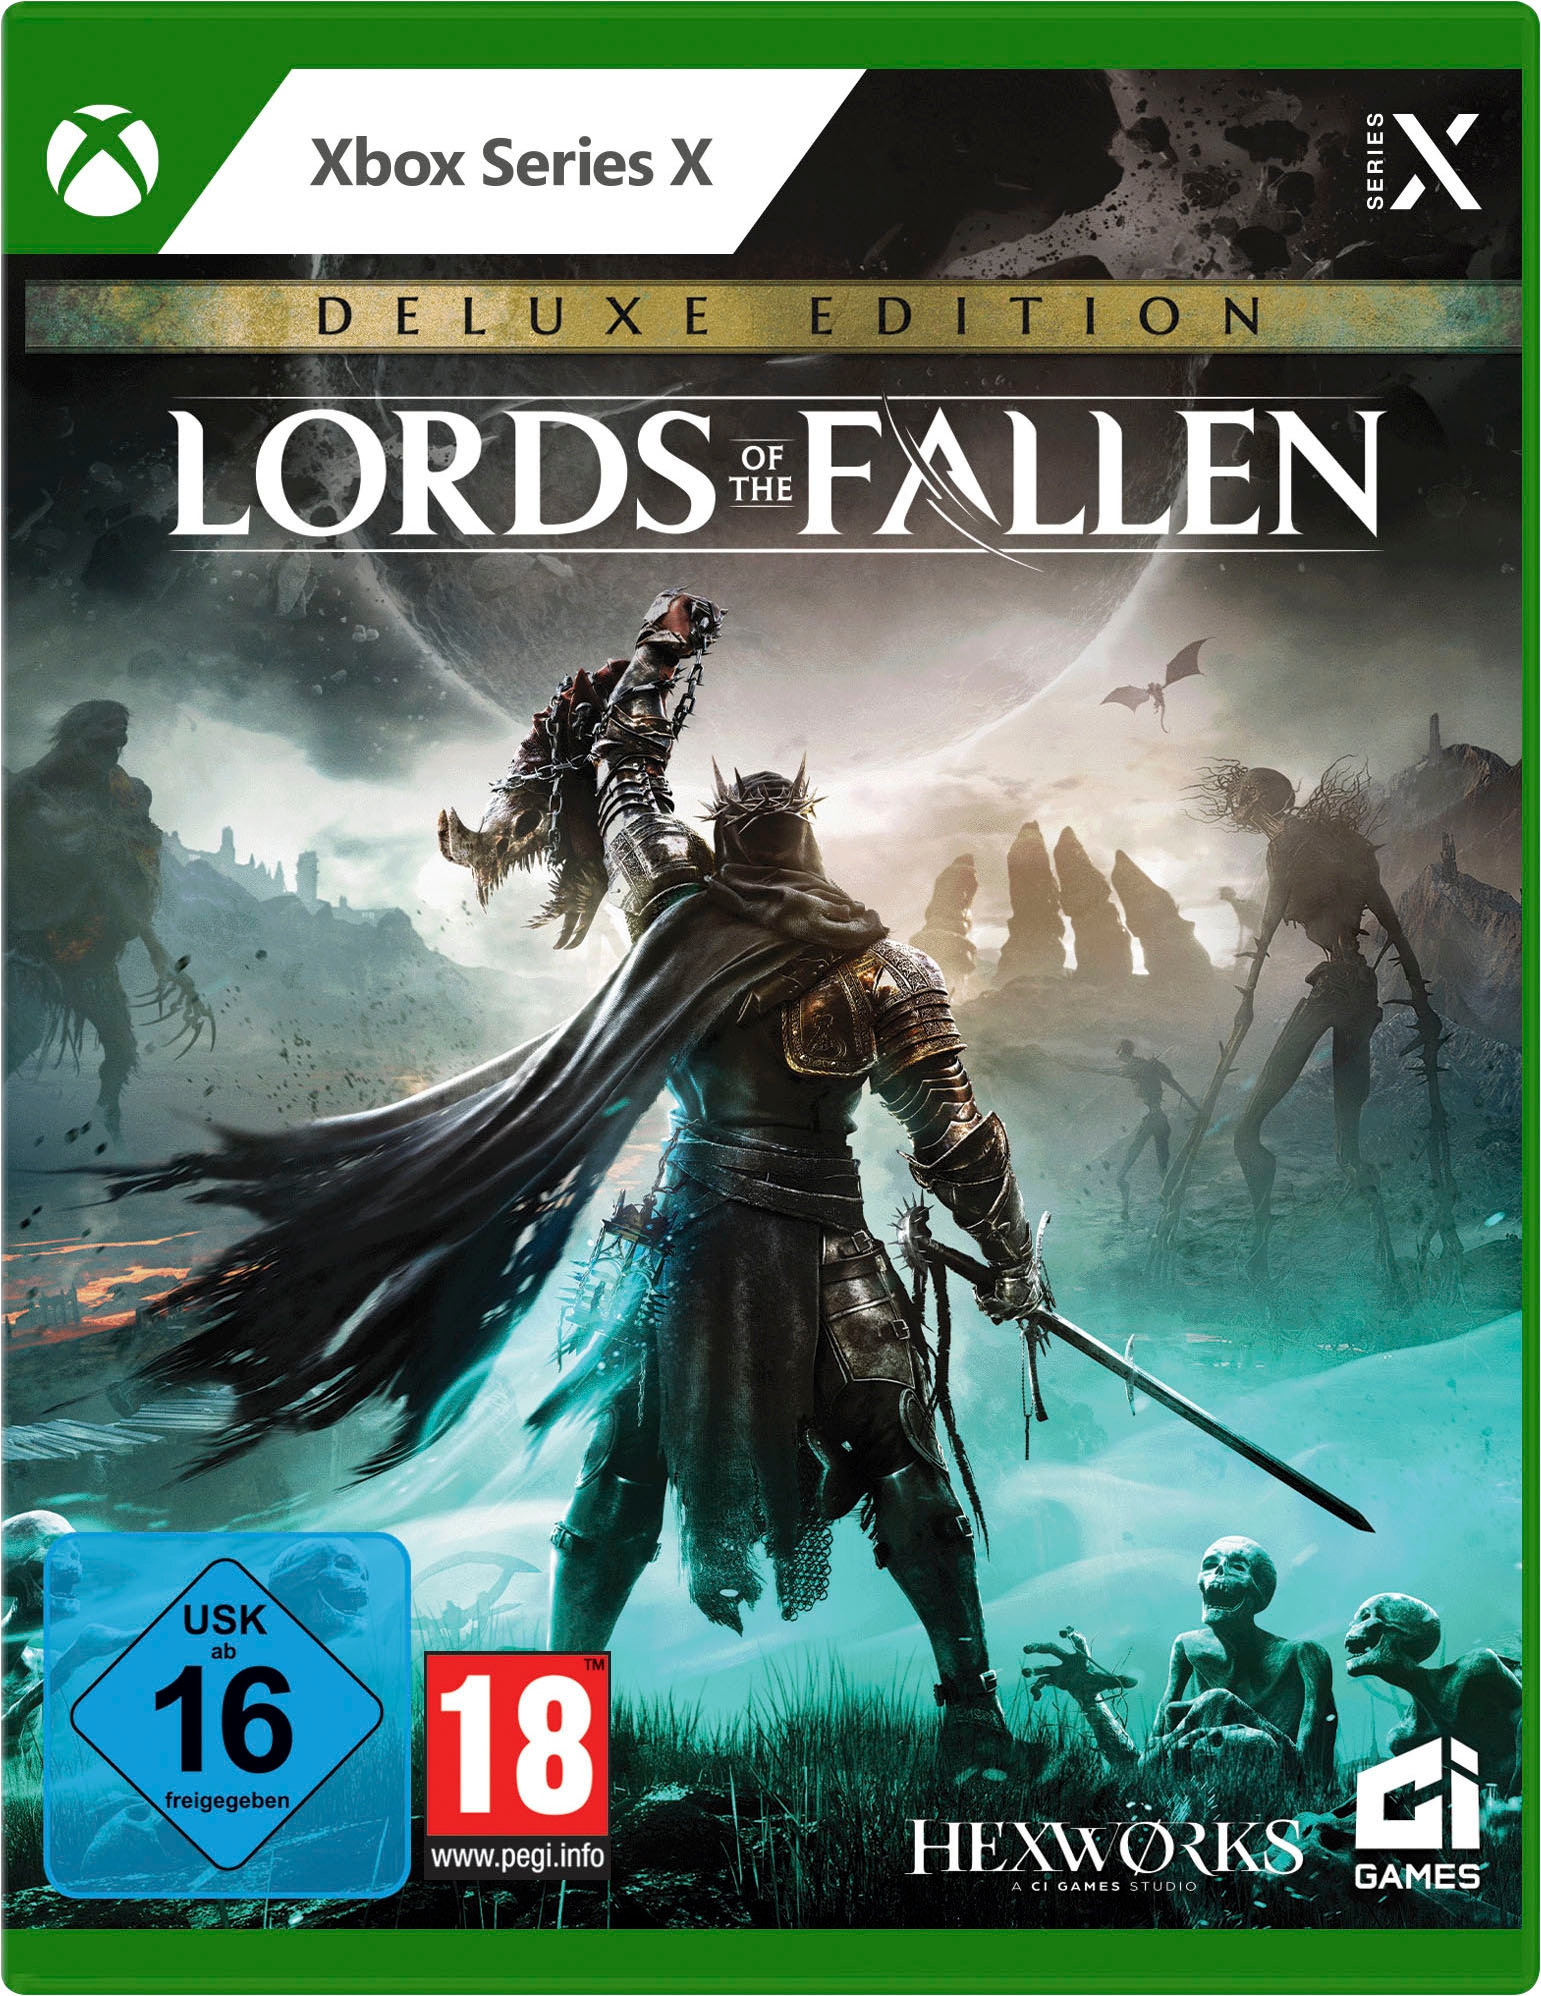 Spielesoftware »Lords of the Fallen Deluxe Edition«, Xbox Series X